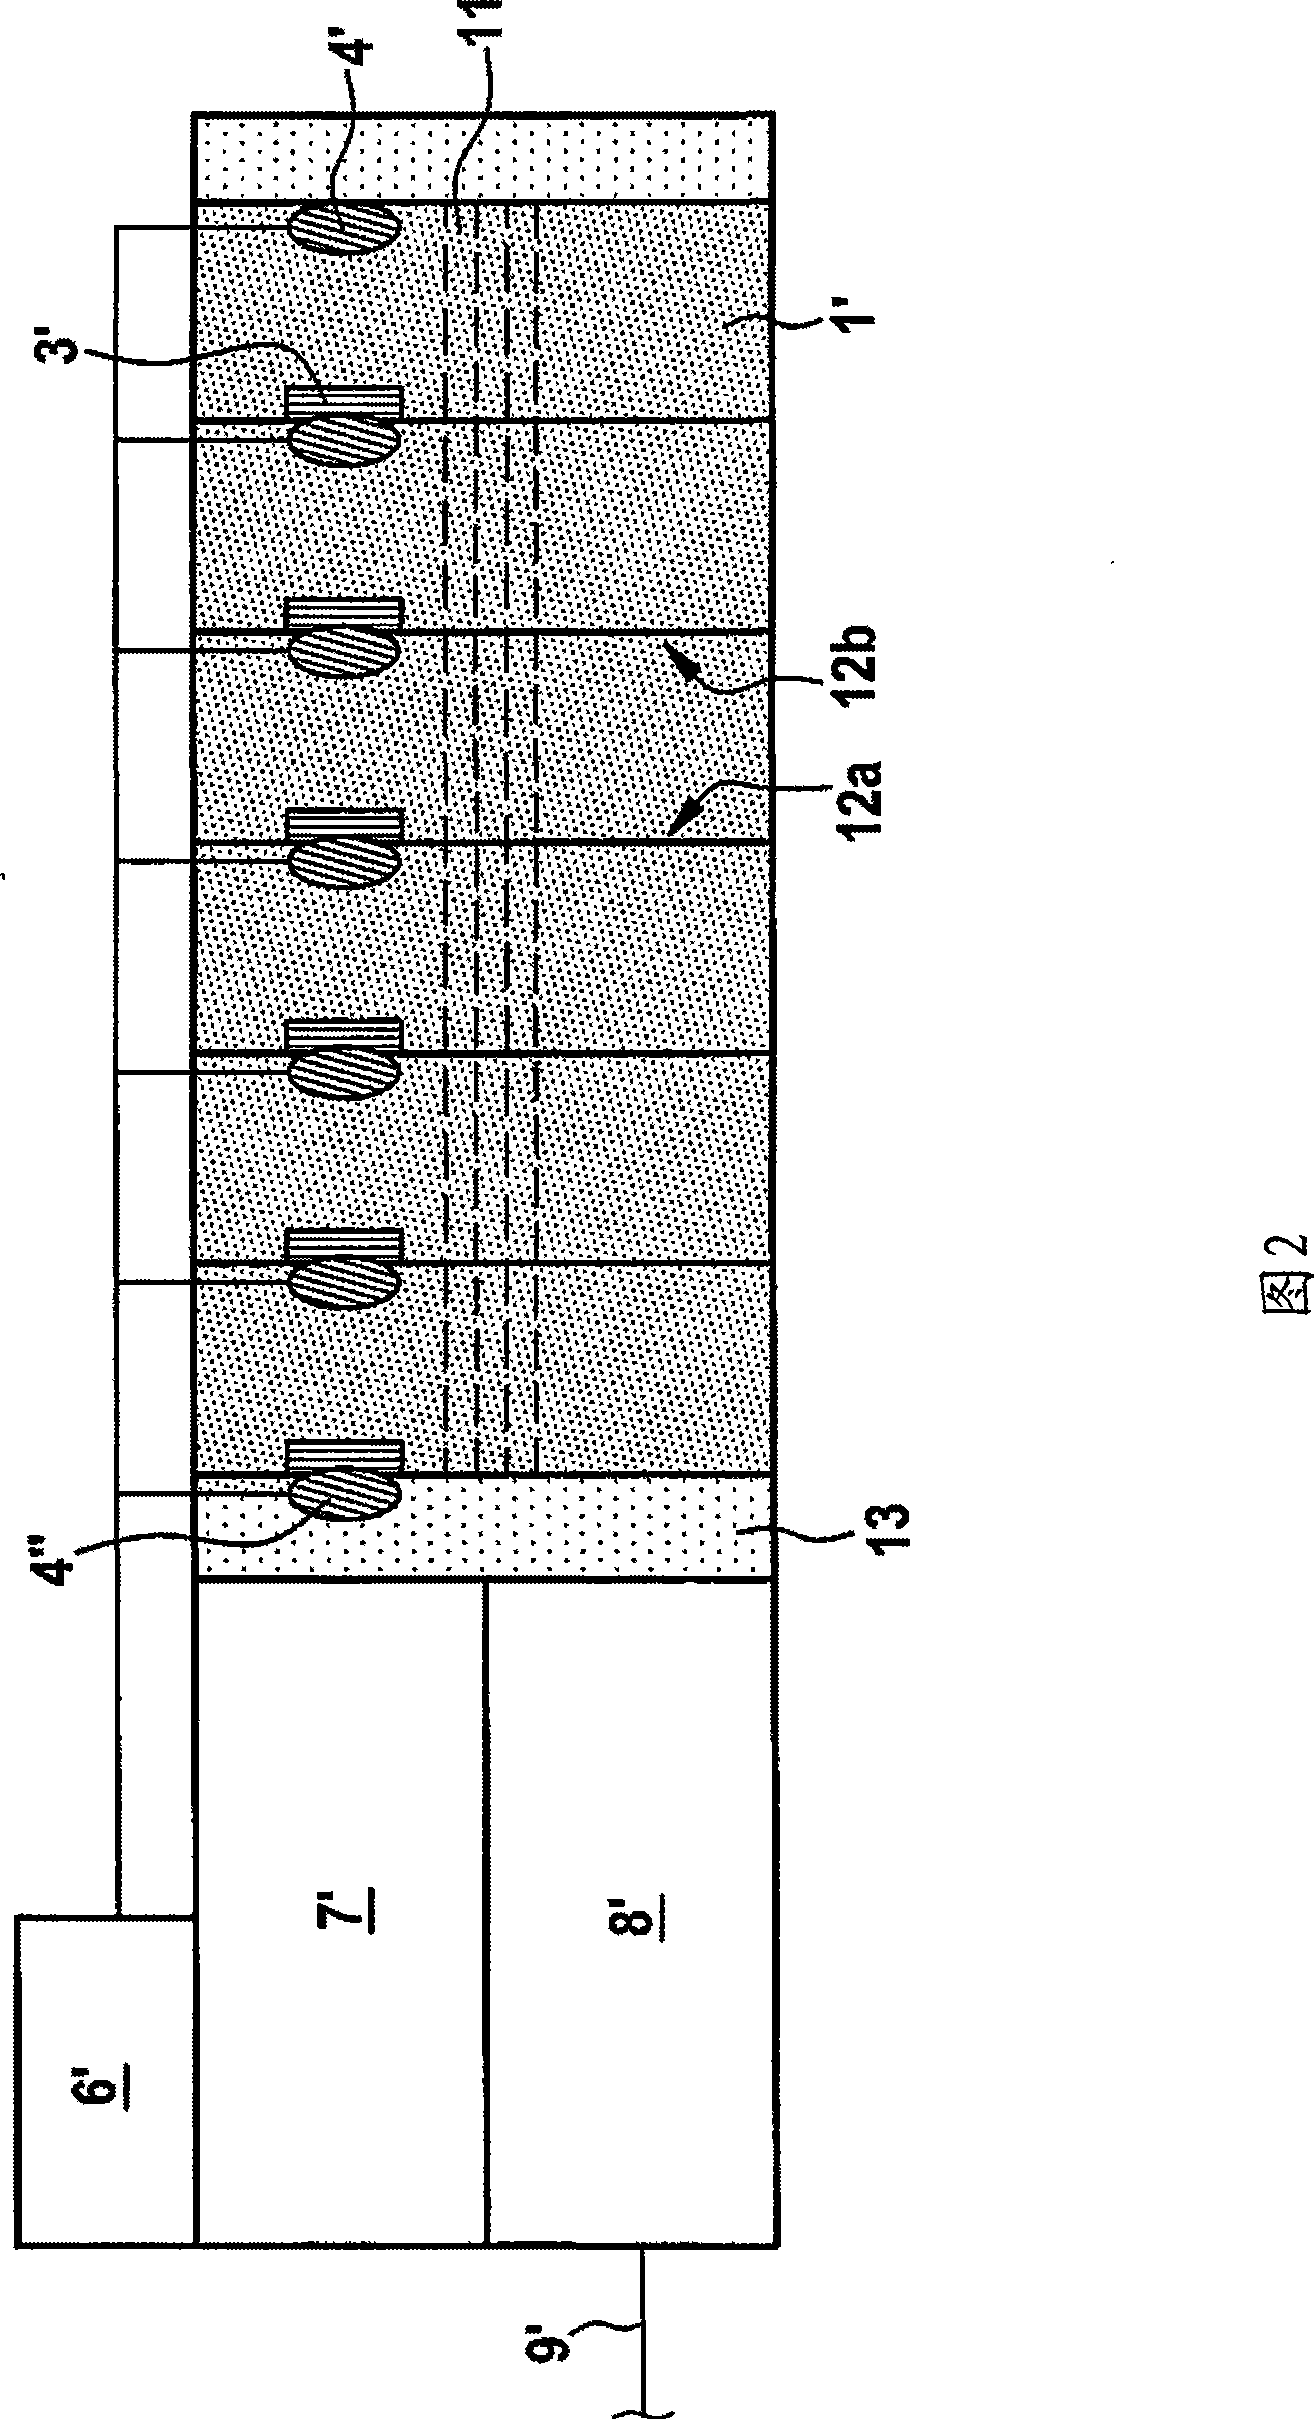 Valve unit with electronic valve recognition devices